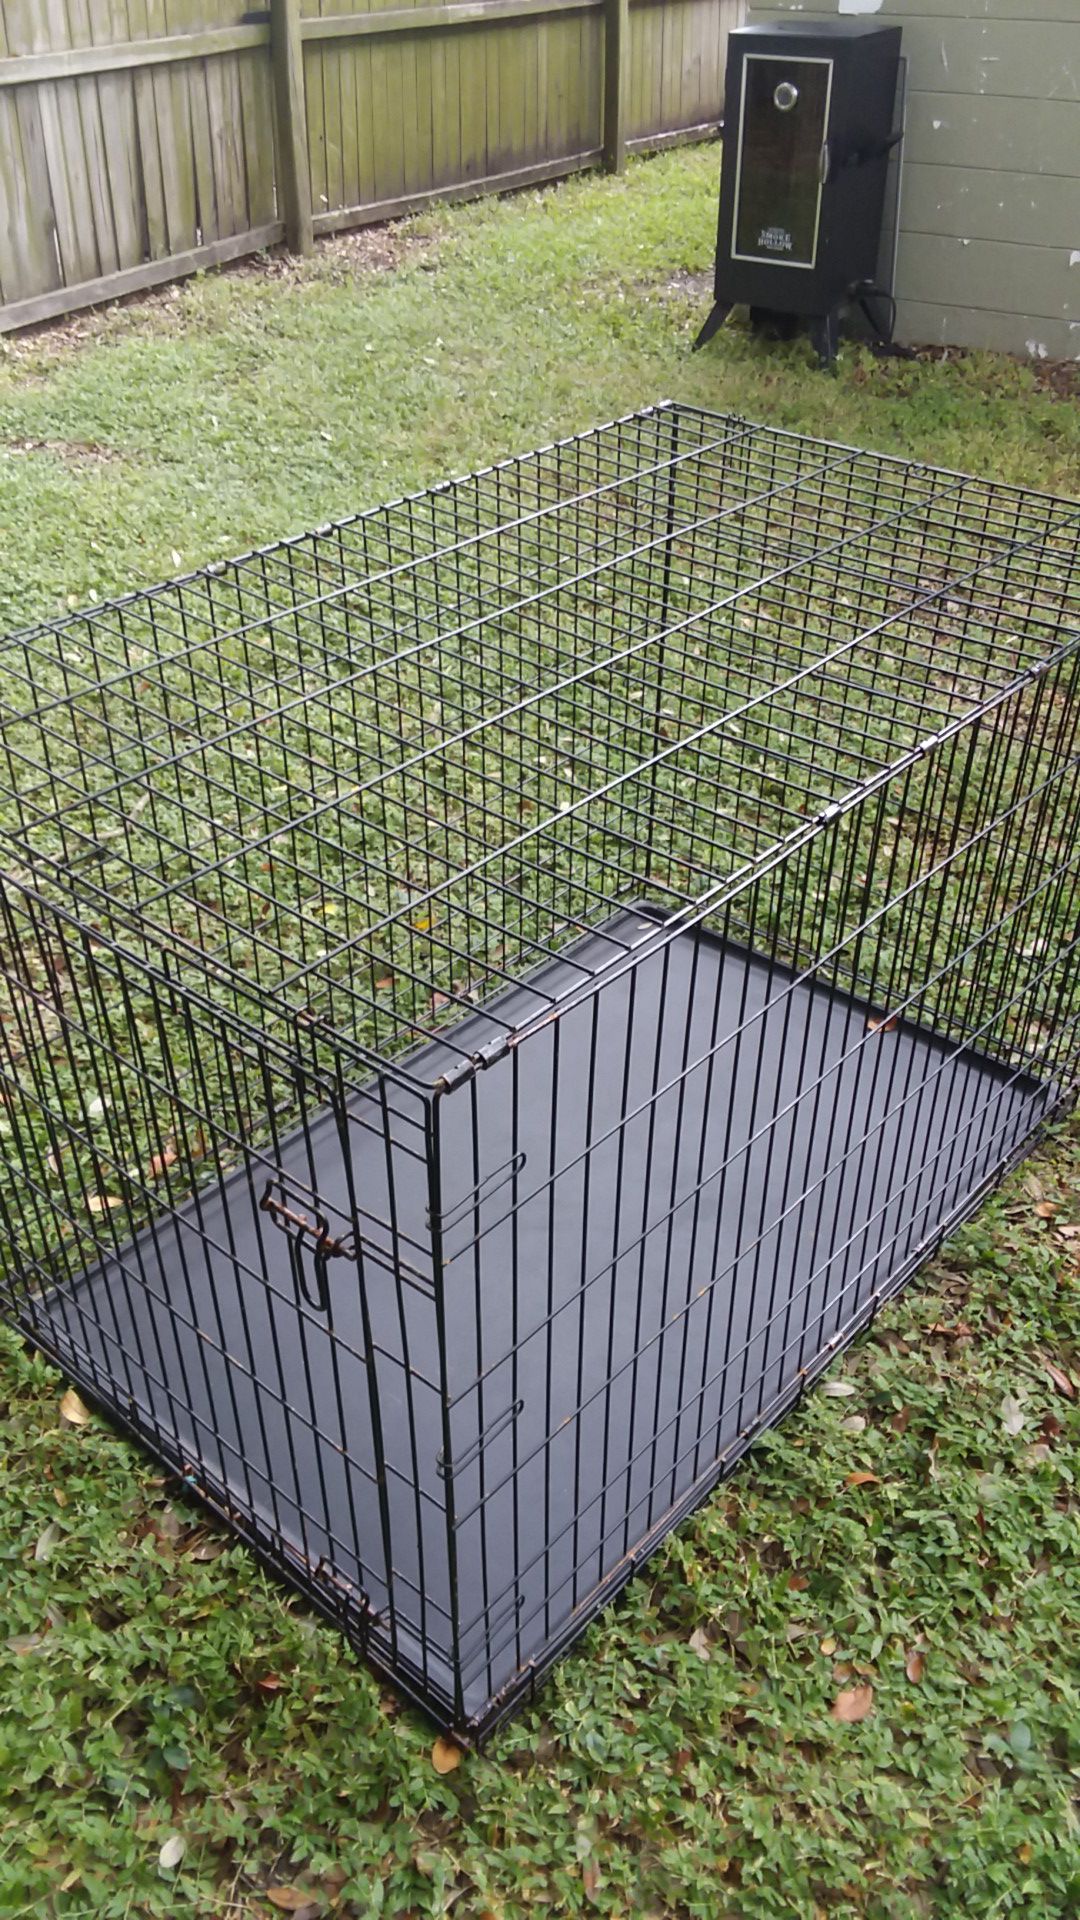 Dog crate/cage 48" x 30"